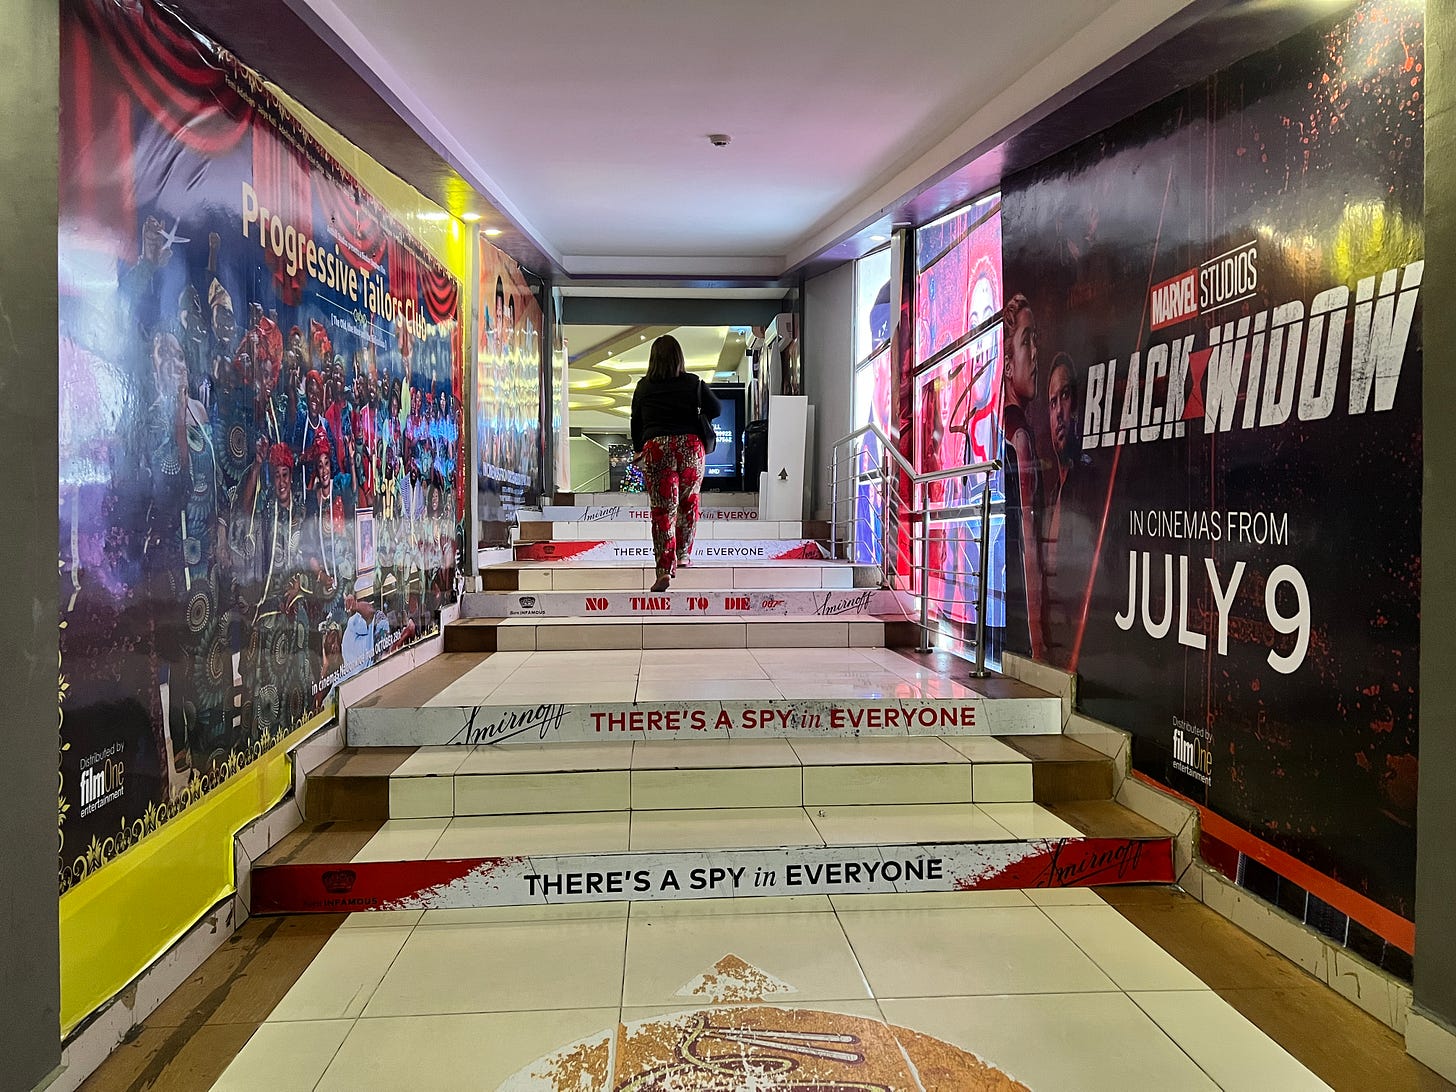 A walkway in the Filmhouse Surulere cinema with movie posters